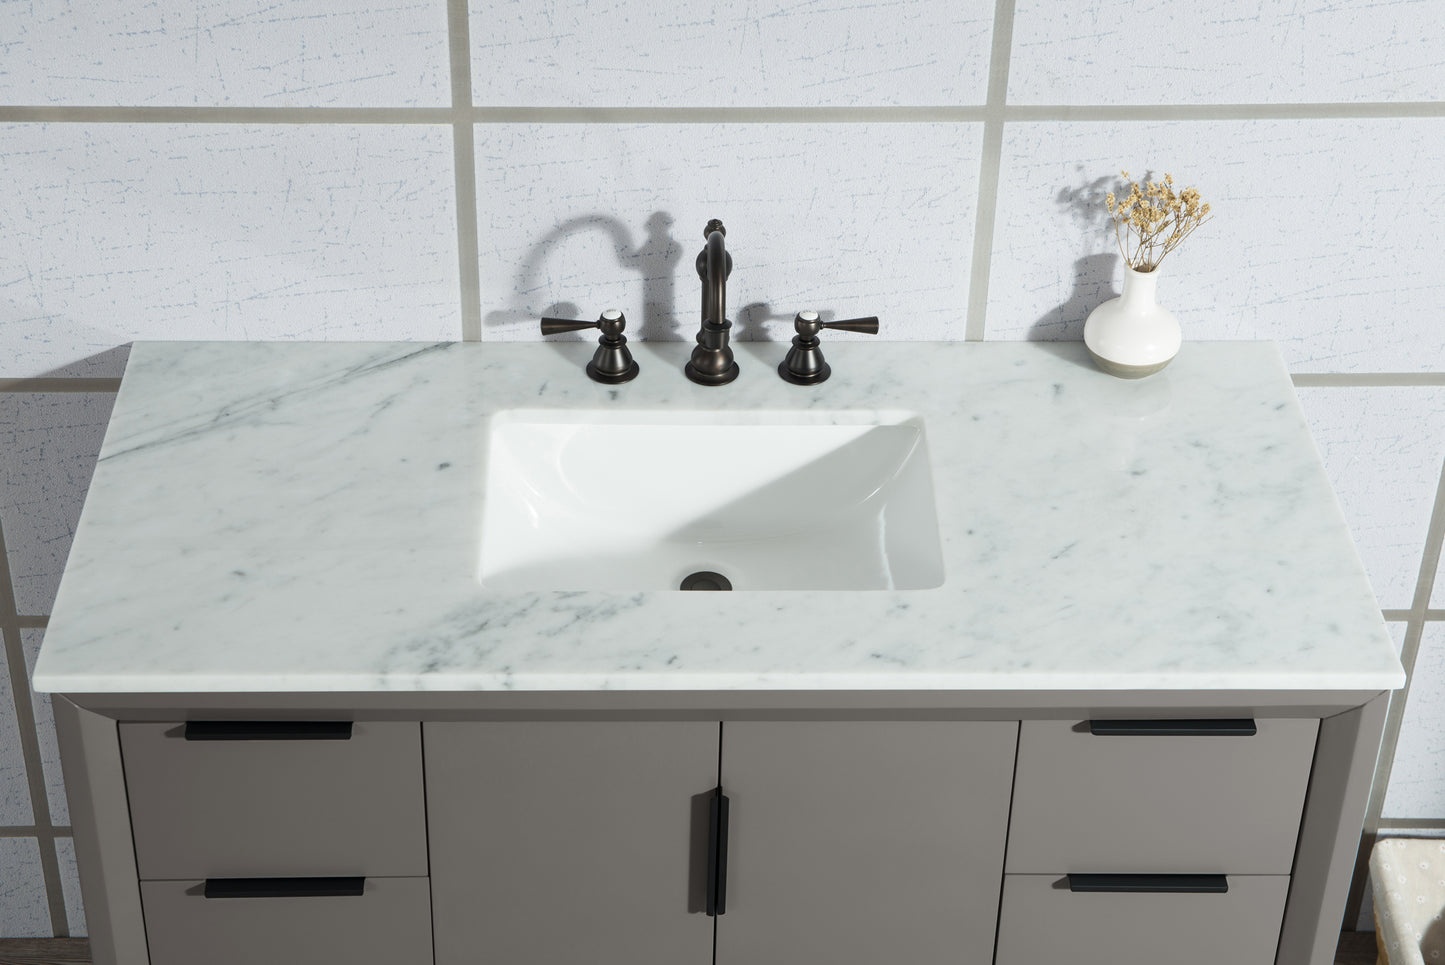 Water Creation Elizabeth 48" Single Sink Carrara White Marble Vanity with Matching Mirror and Lavatory Faucet - Luxe Bathroom Vanities